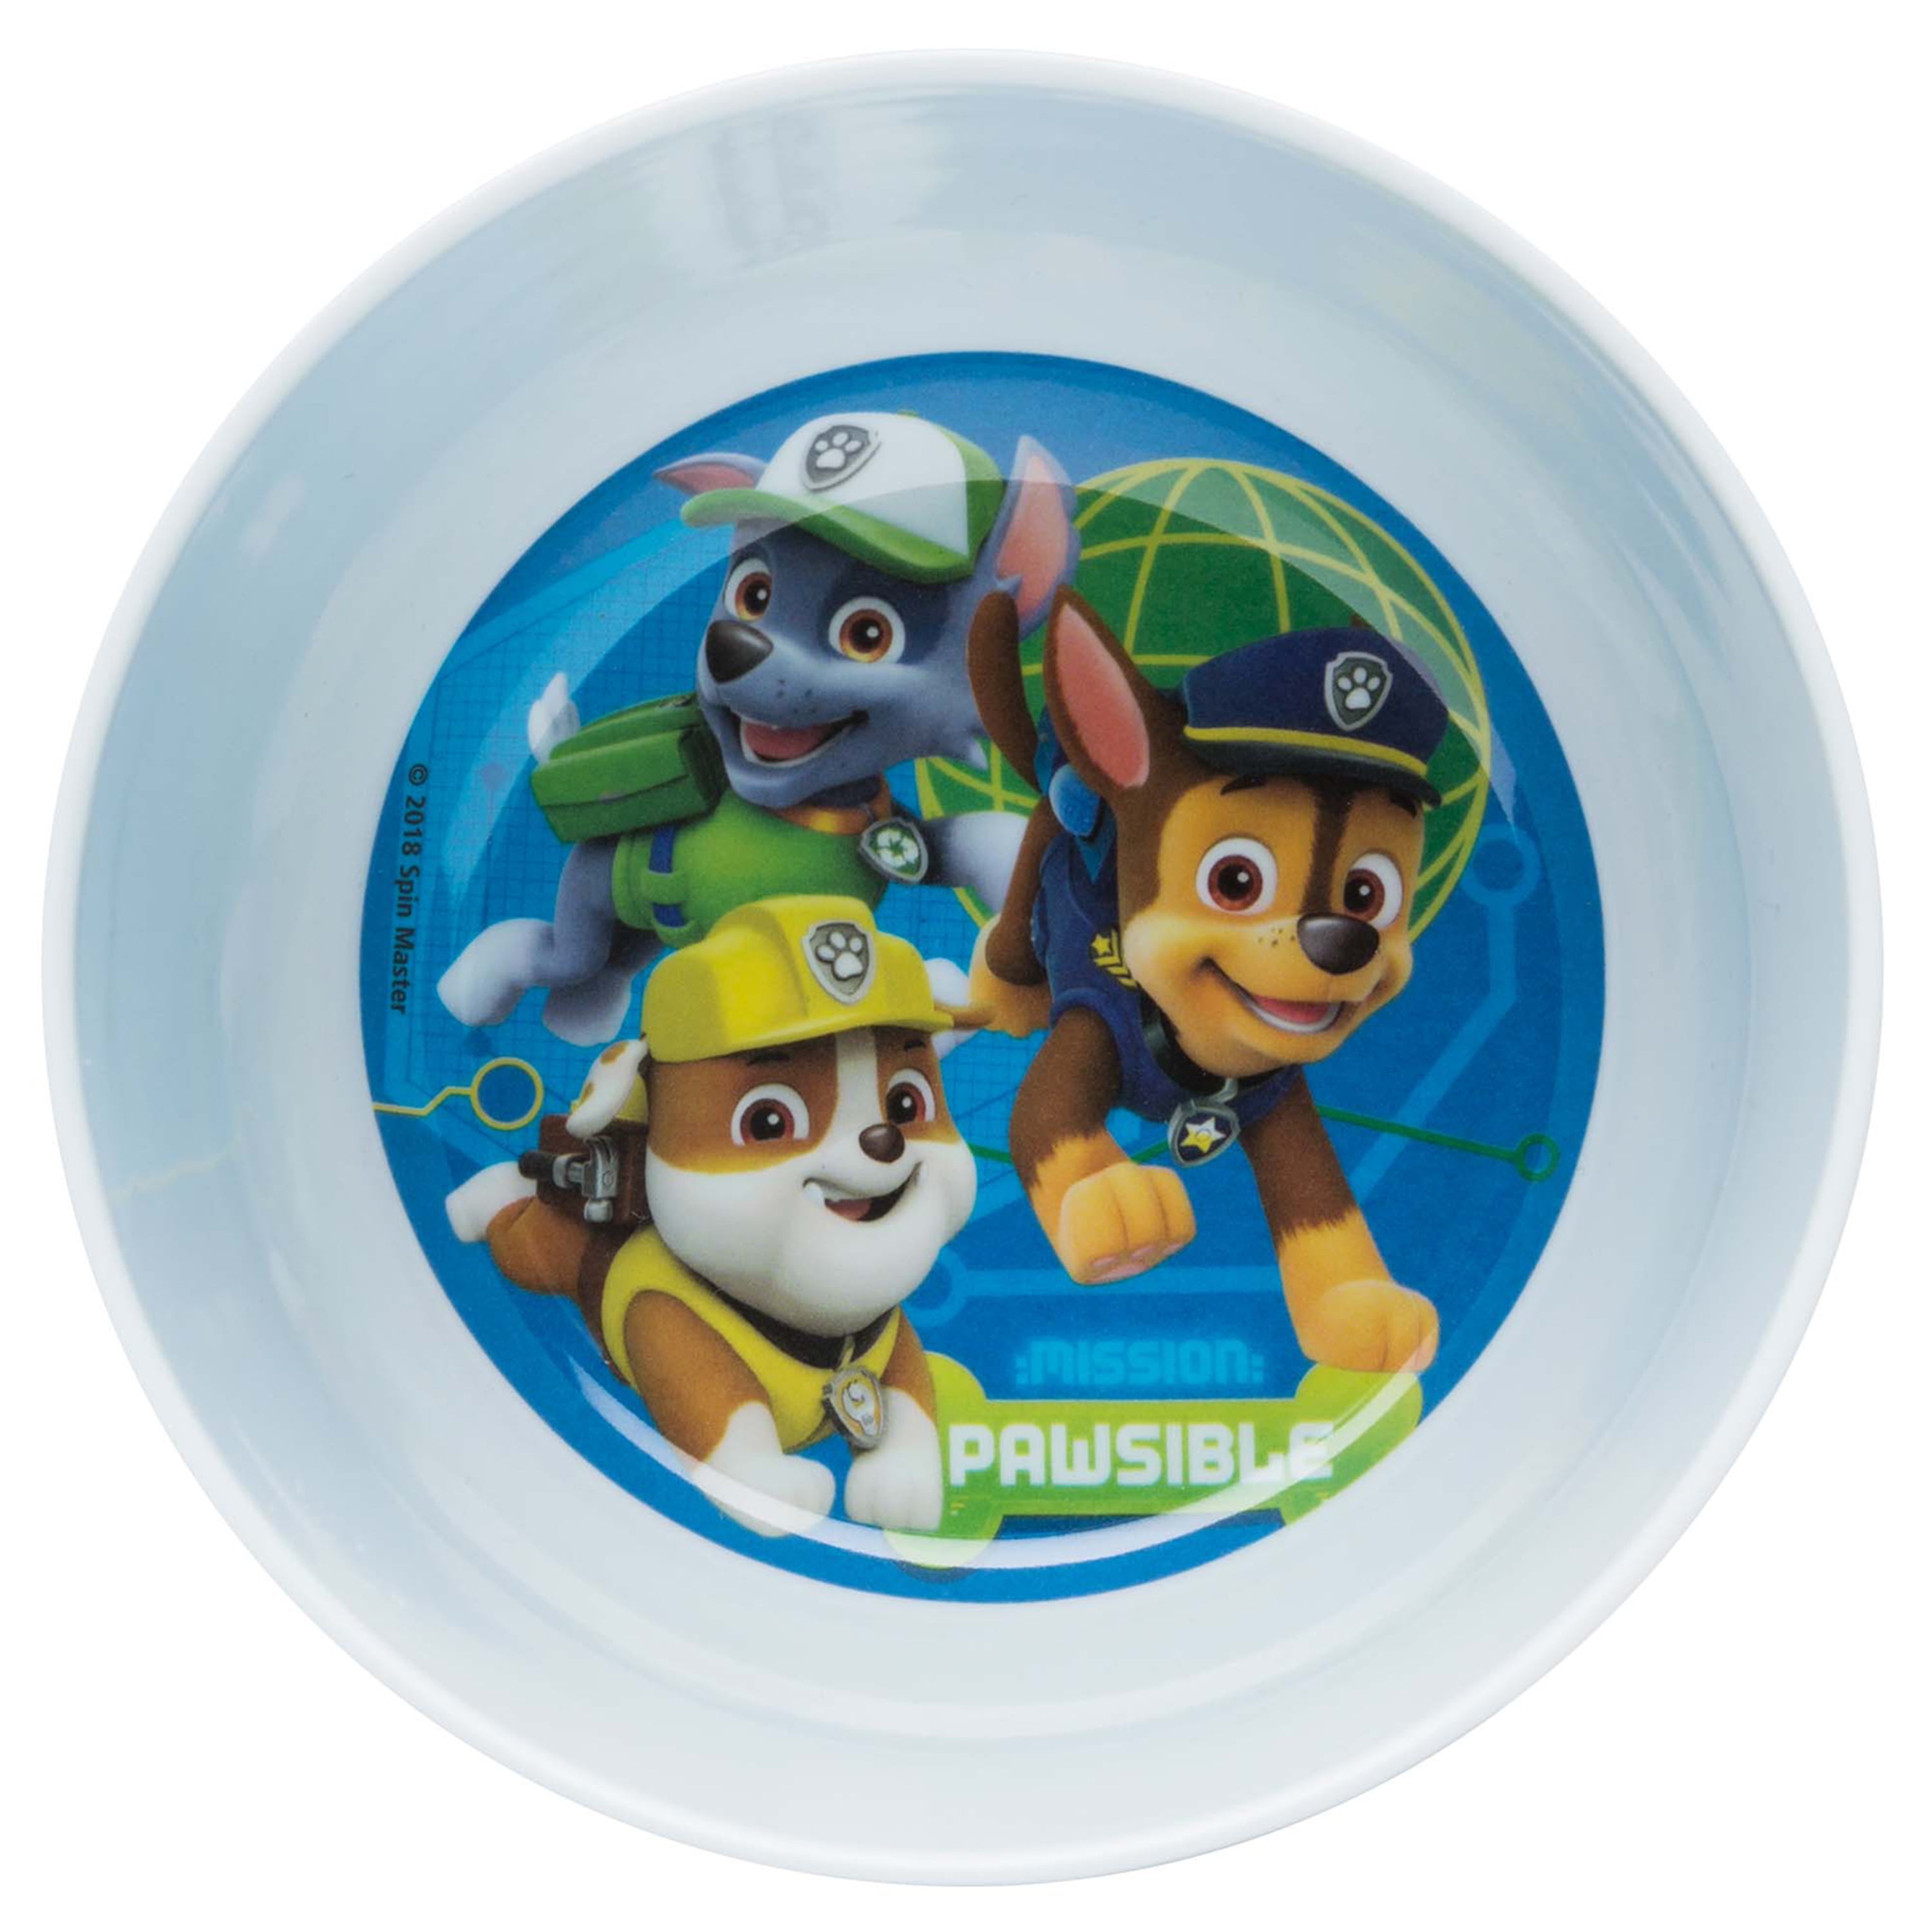 Details about   3 Pieces Kids Micro Dining Set Plate,Cup Utensils Paw Patrol Breakfast Dinner